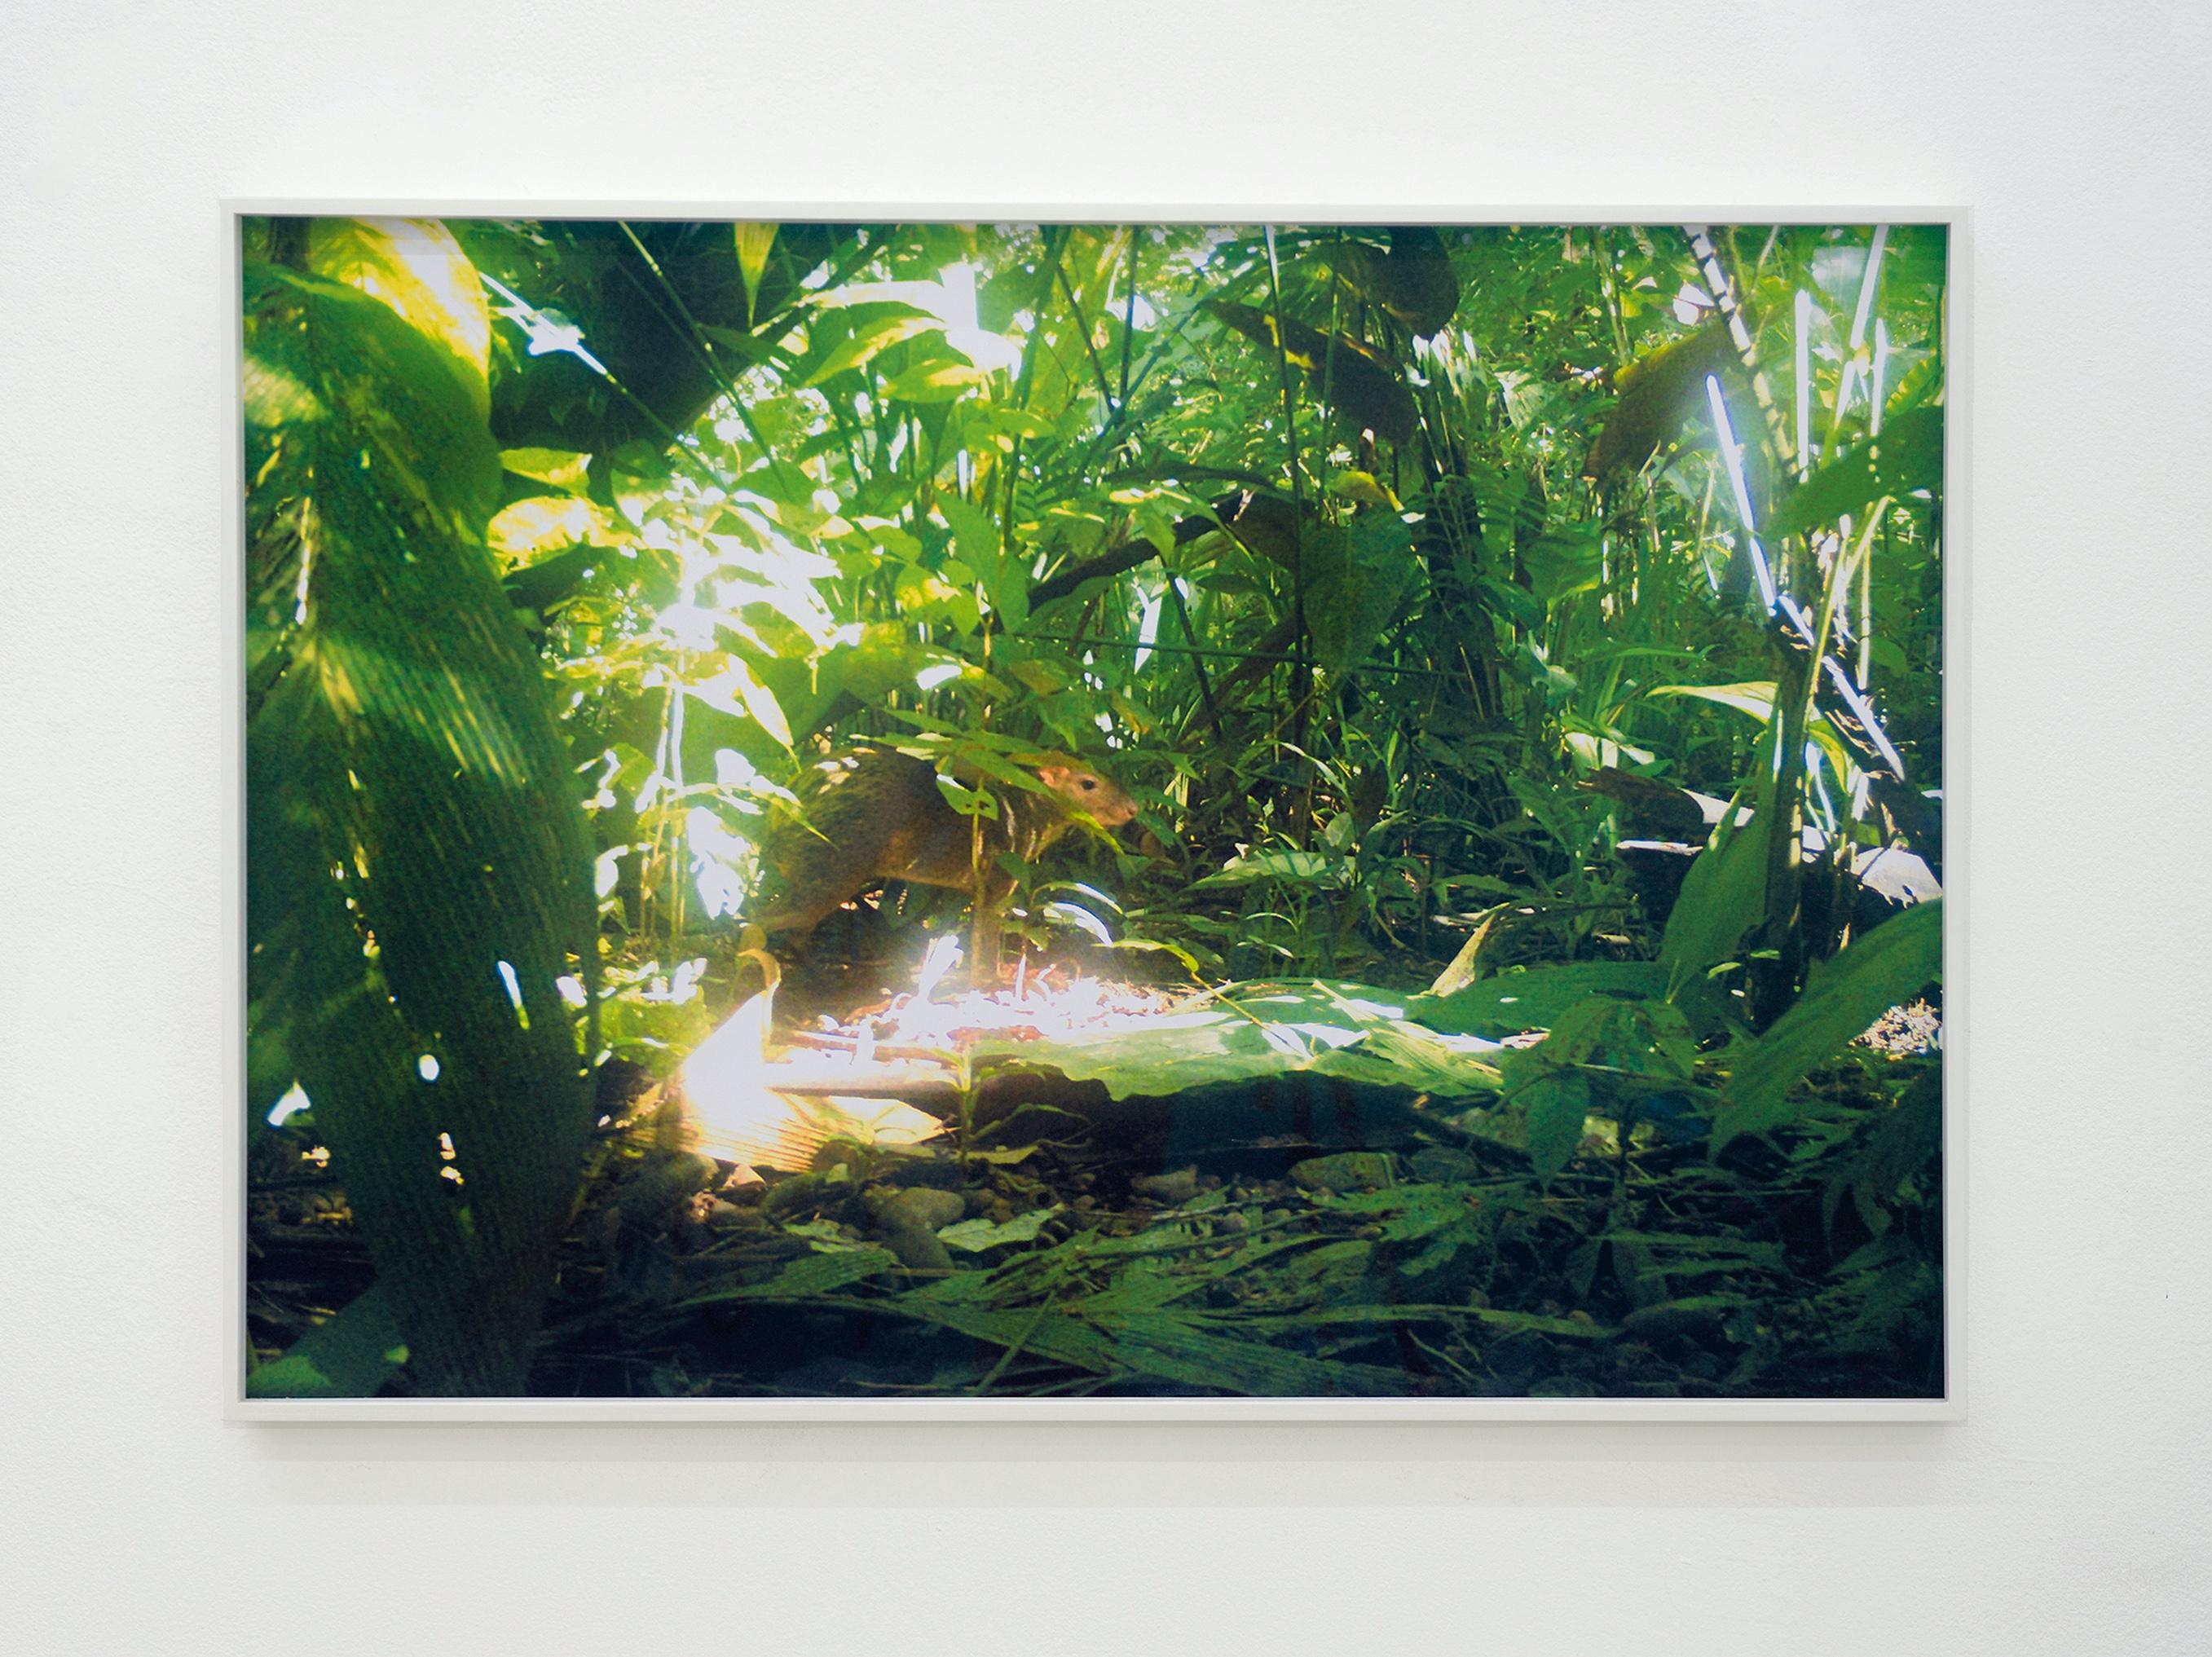 Tina Ribarits
camera trap (Aguti) Ed. 3/3 - Contemporary Color Landscape Jungle Photography
Edition 3/3+2 AP
Print ist unframed and comes with a sticker signed by the artist.

Tina Ribarits works with a conceptual approach in a variety of media